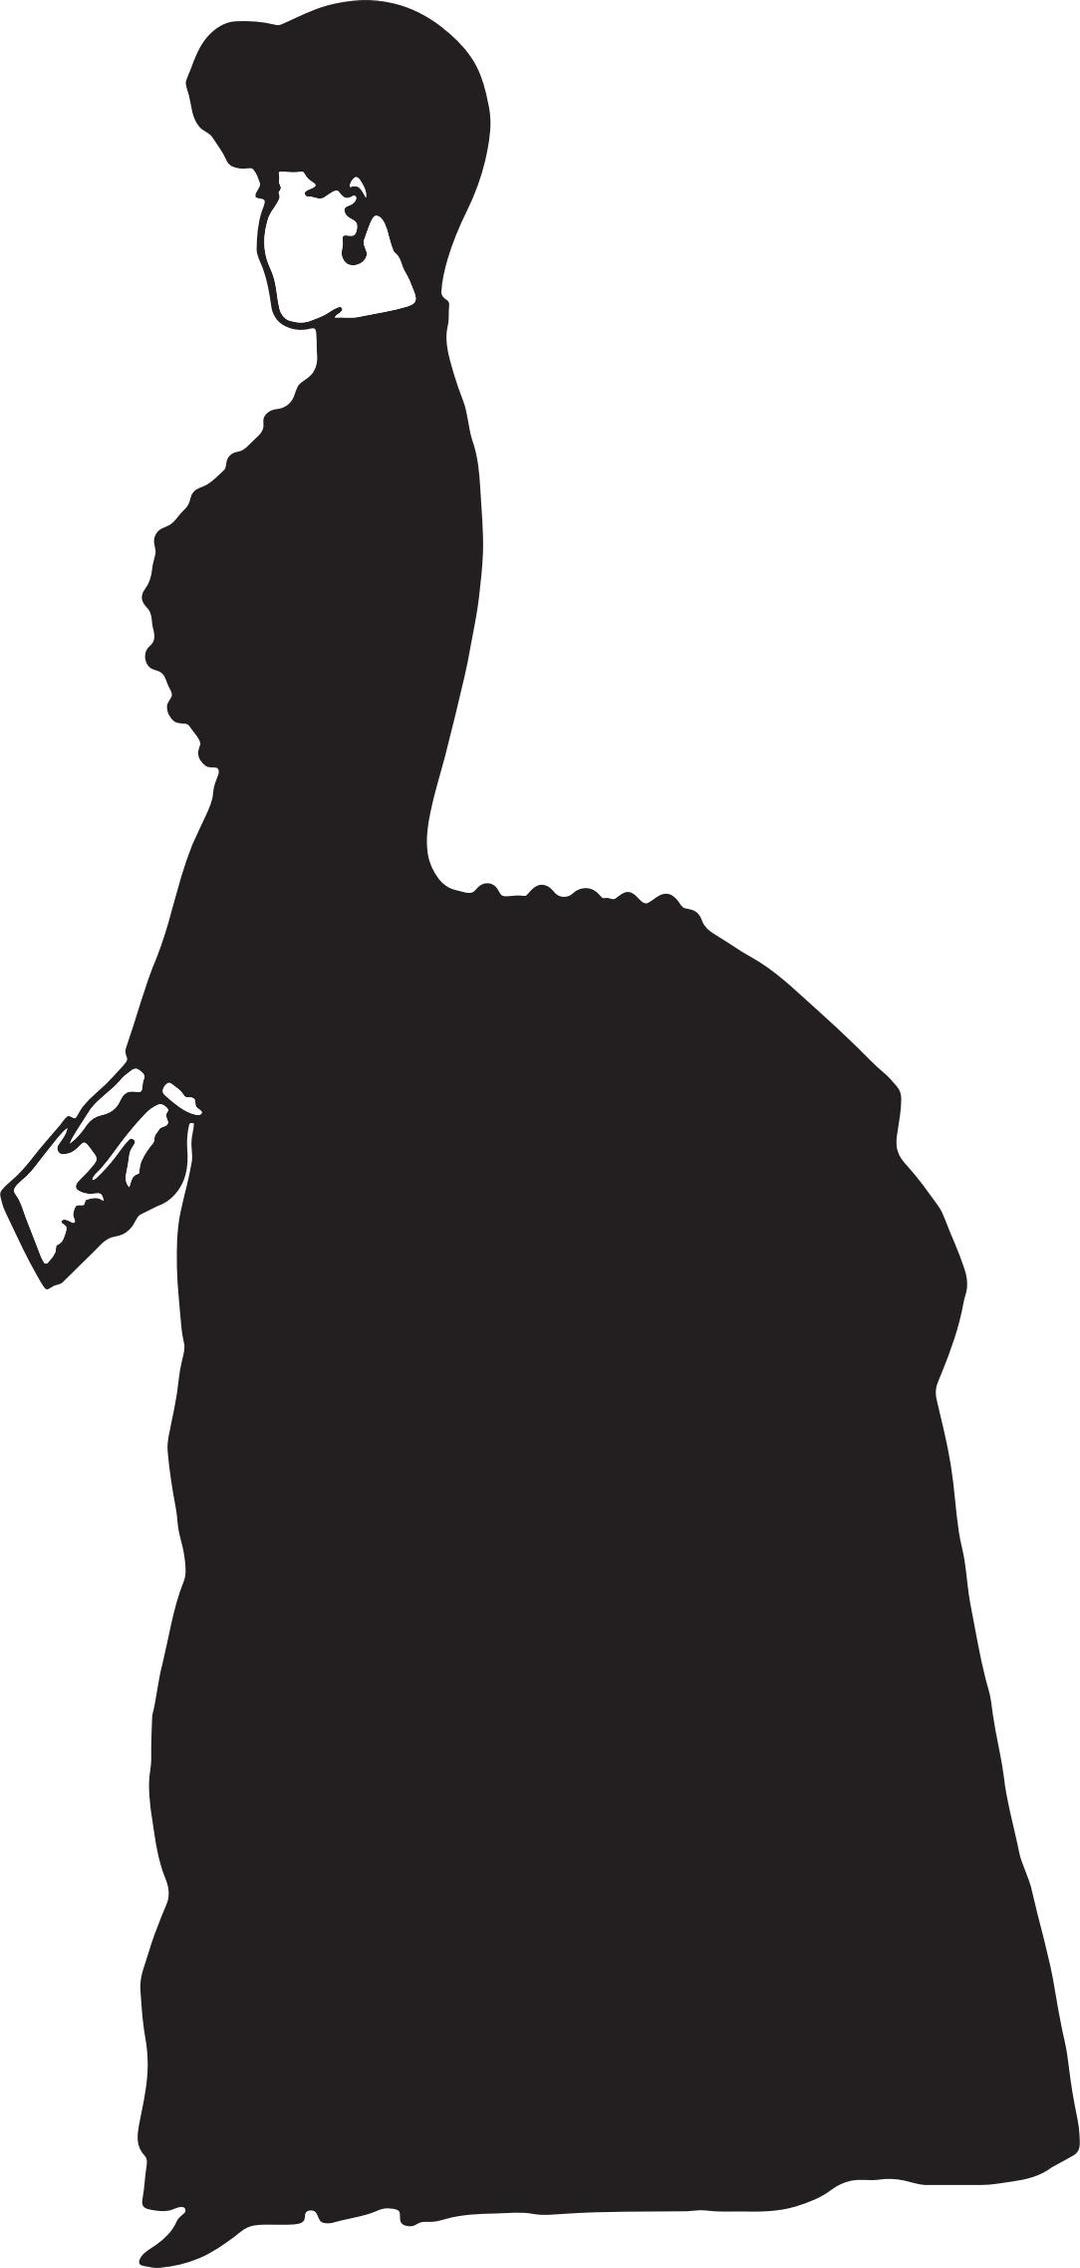 Old Fashioned Victorian Woman Silhouette png transparent